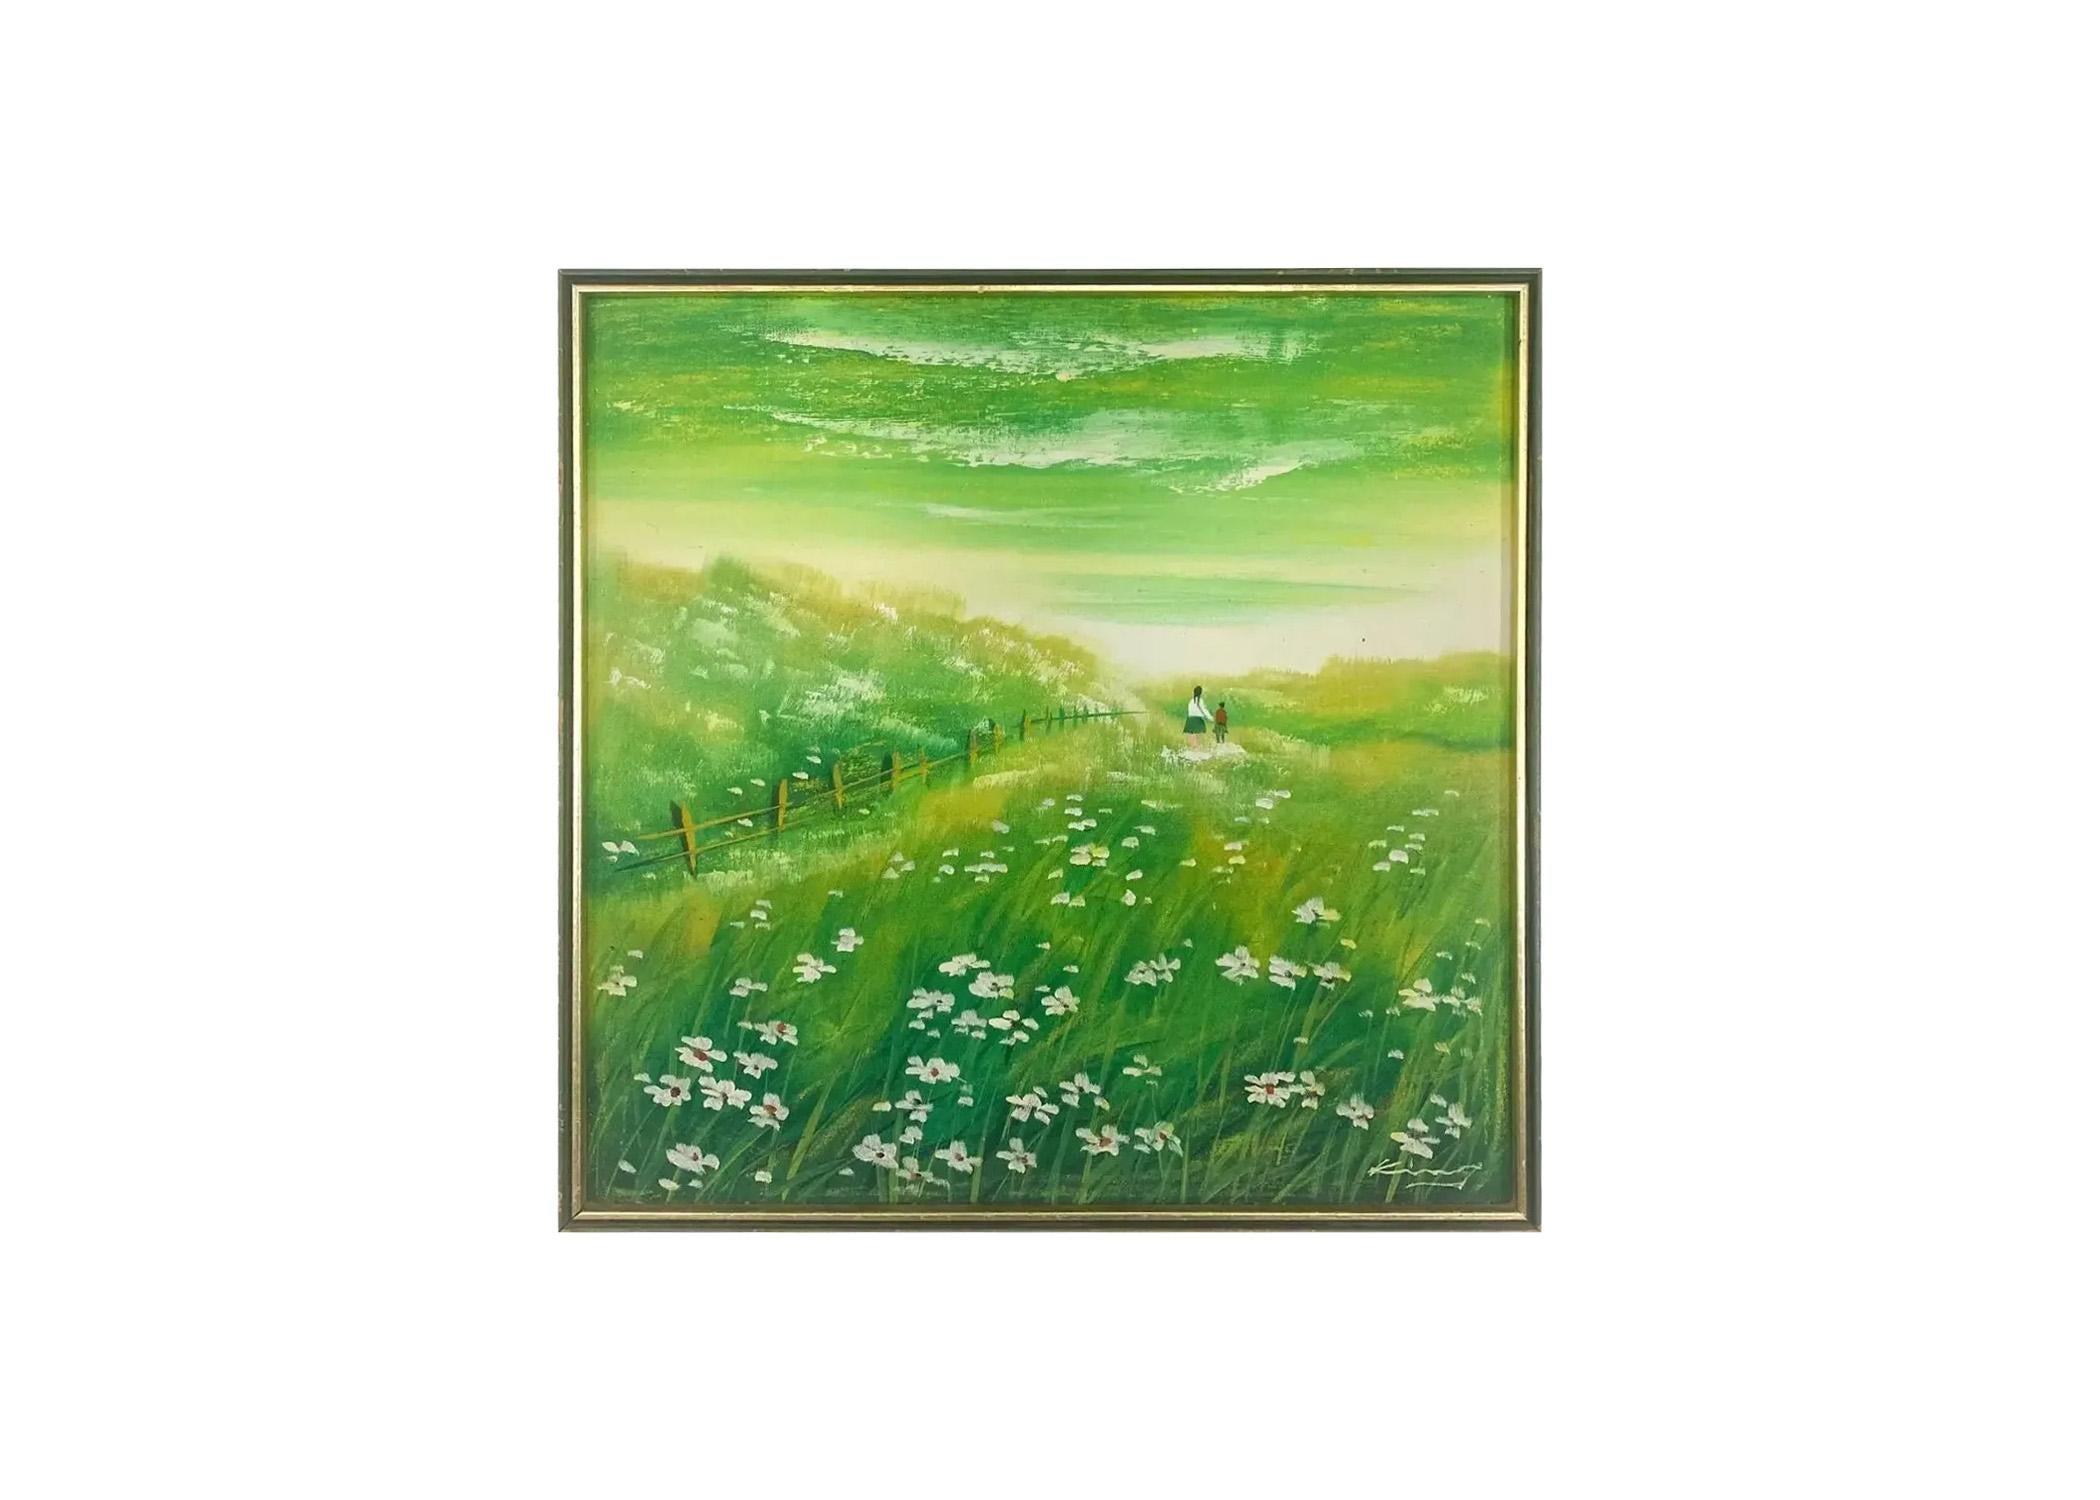 Unknown Landscape Painting - Daisies Green Field Landscape Oil on Panel Painting , Signed